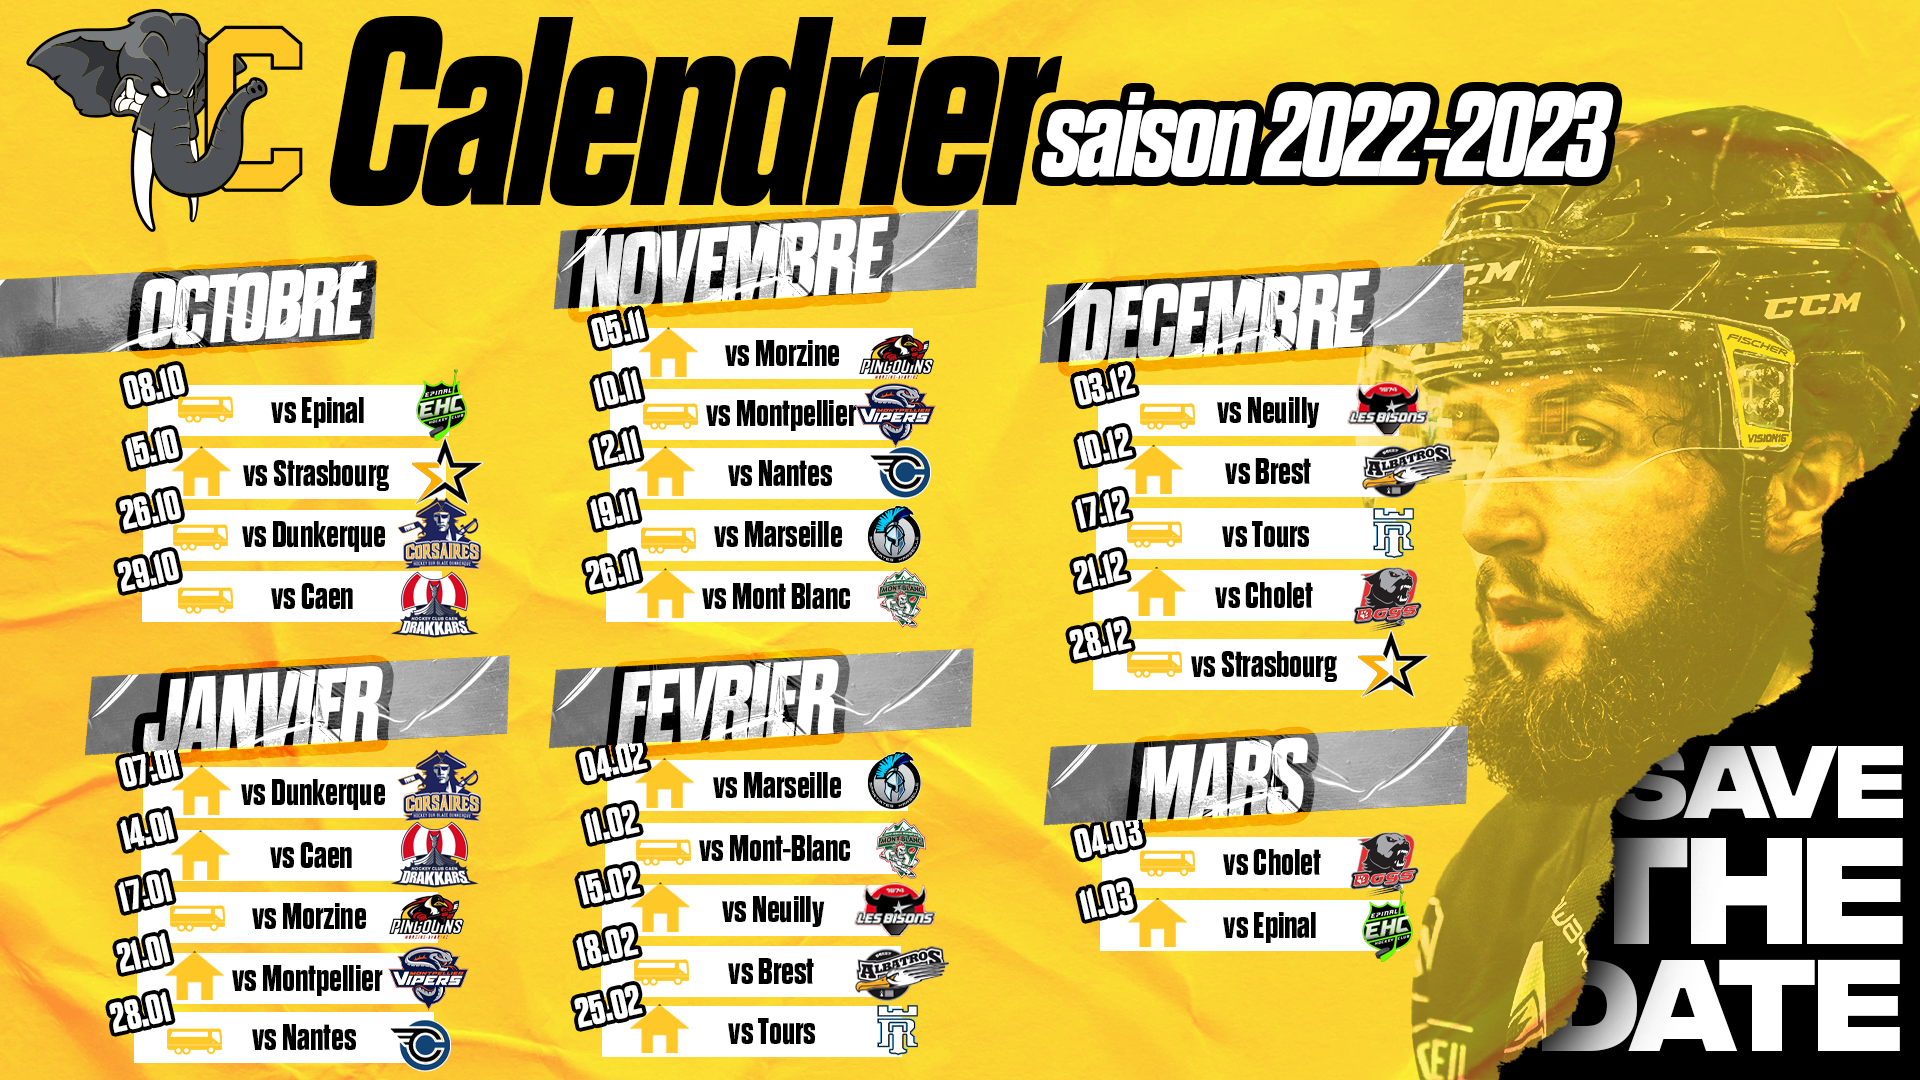 Calendrier-matchs-22-23-1.png